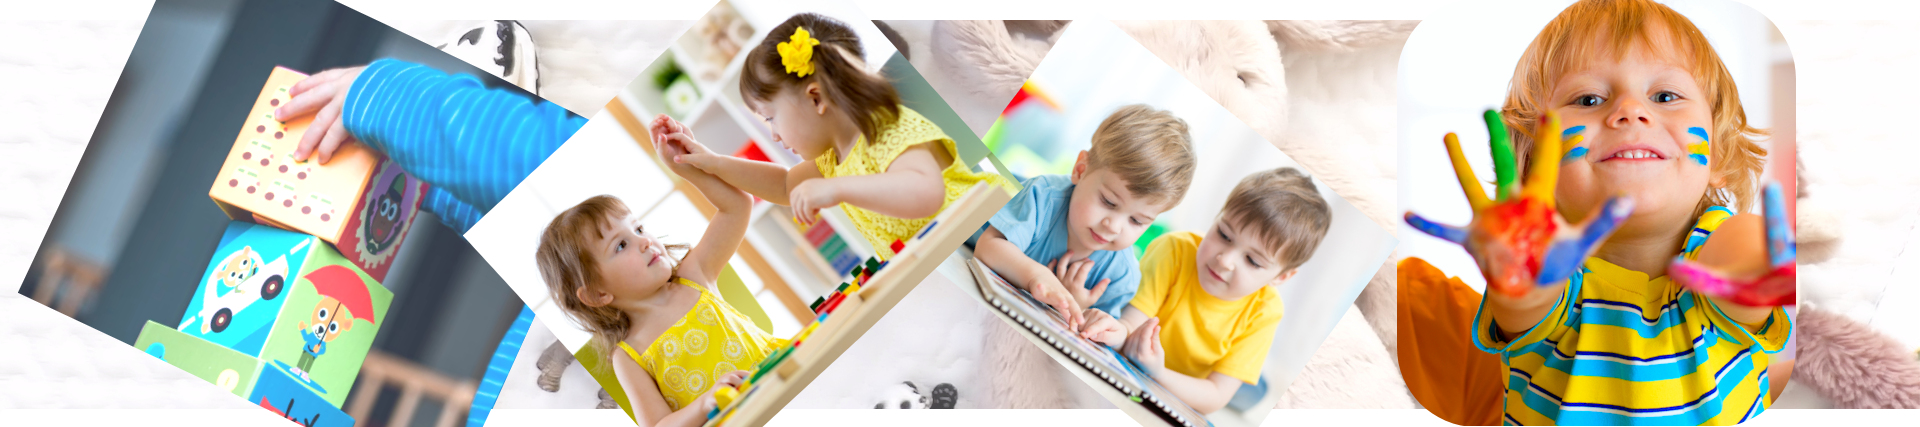 Website design choices for child care and nursery online presence.